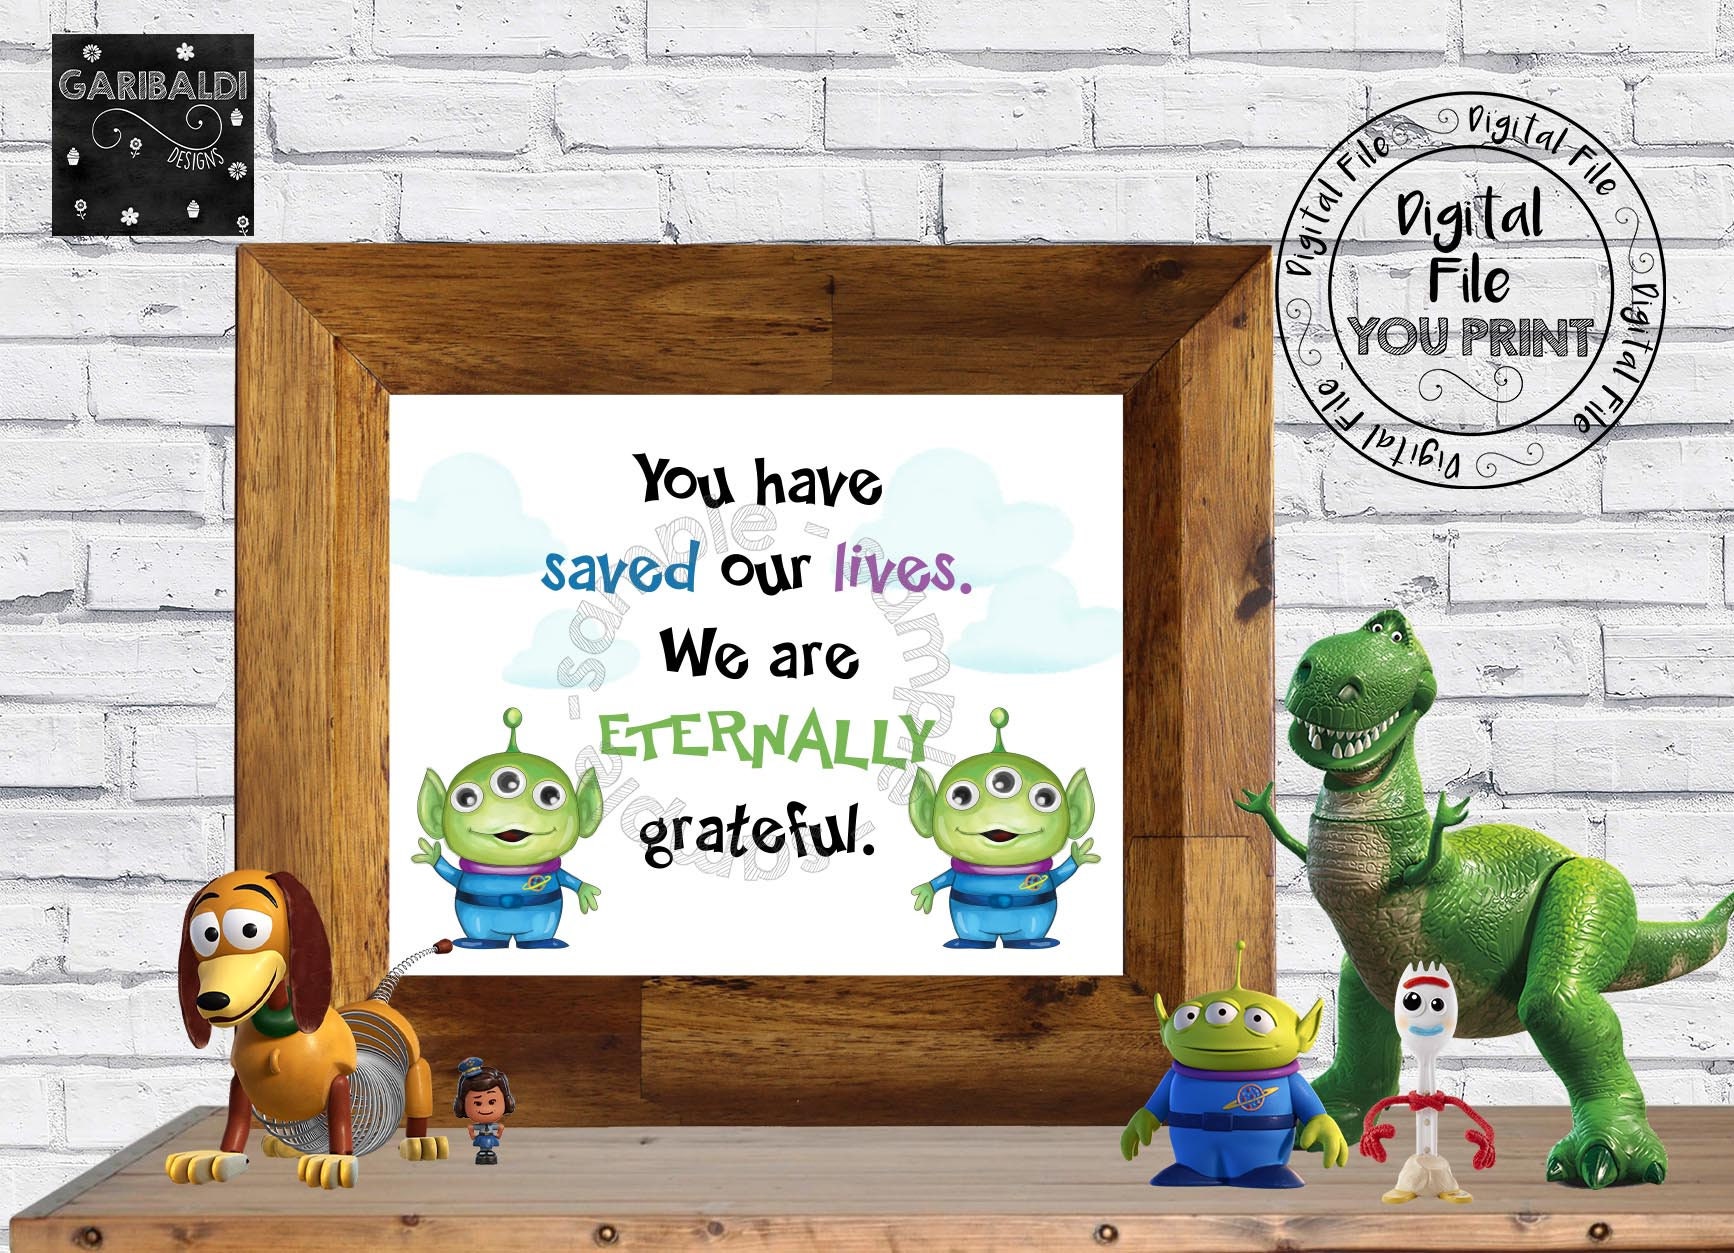 toy story aliens quotes